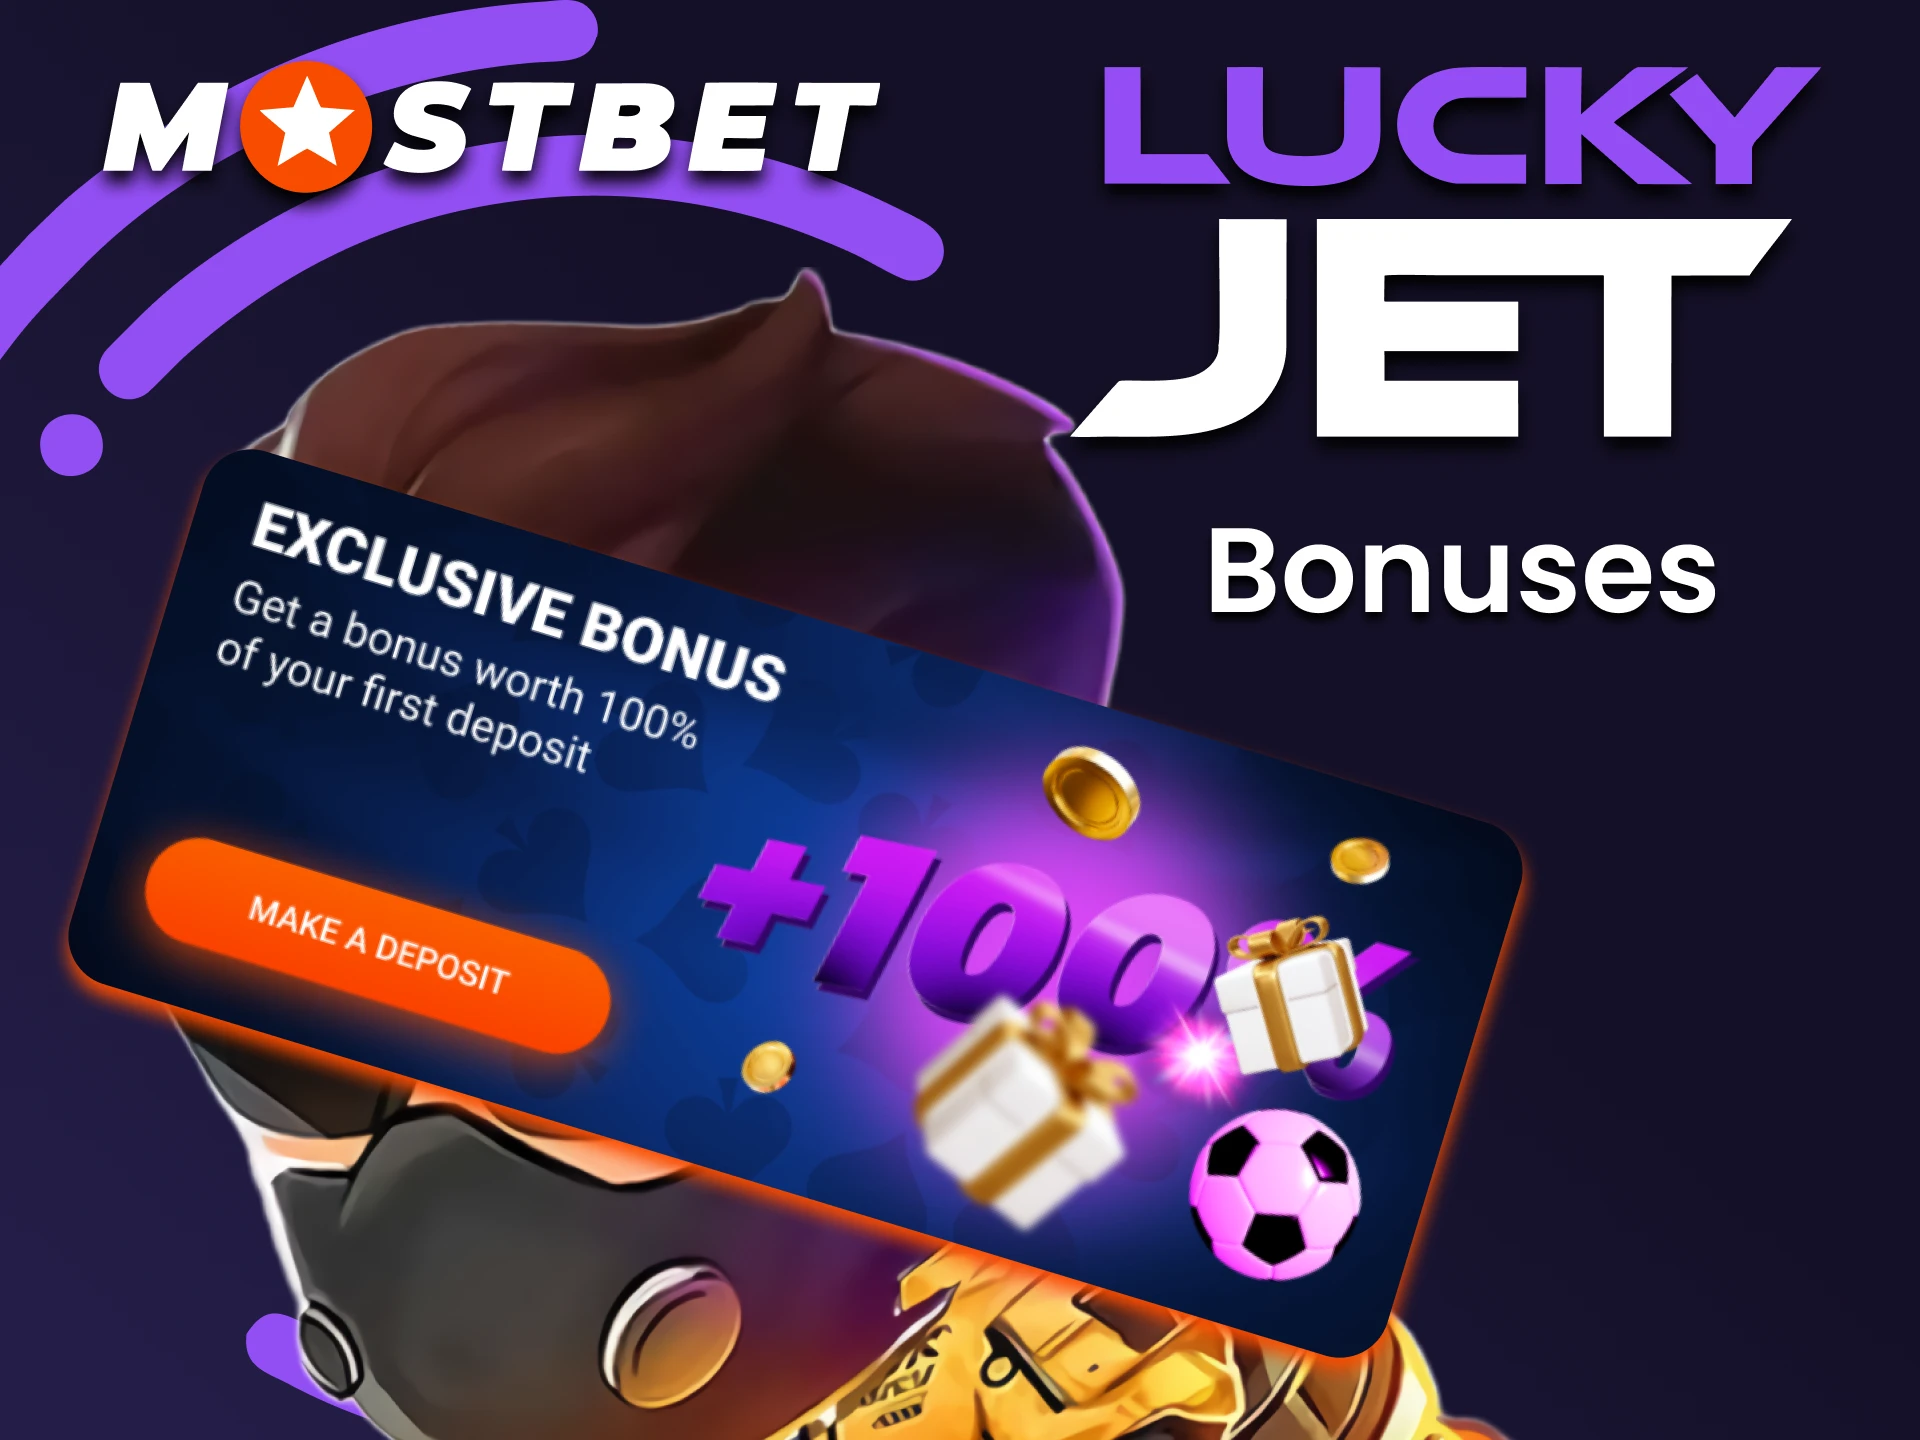 By choosing Mostbet to play Lucky Jet you will receive bonuses.